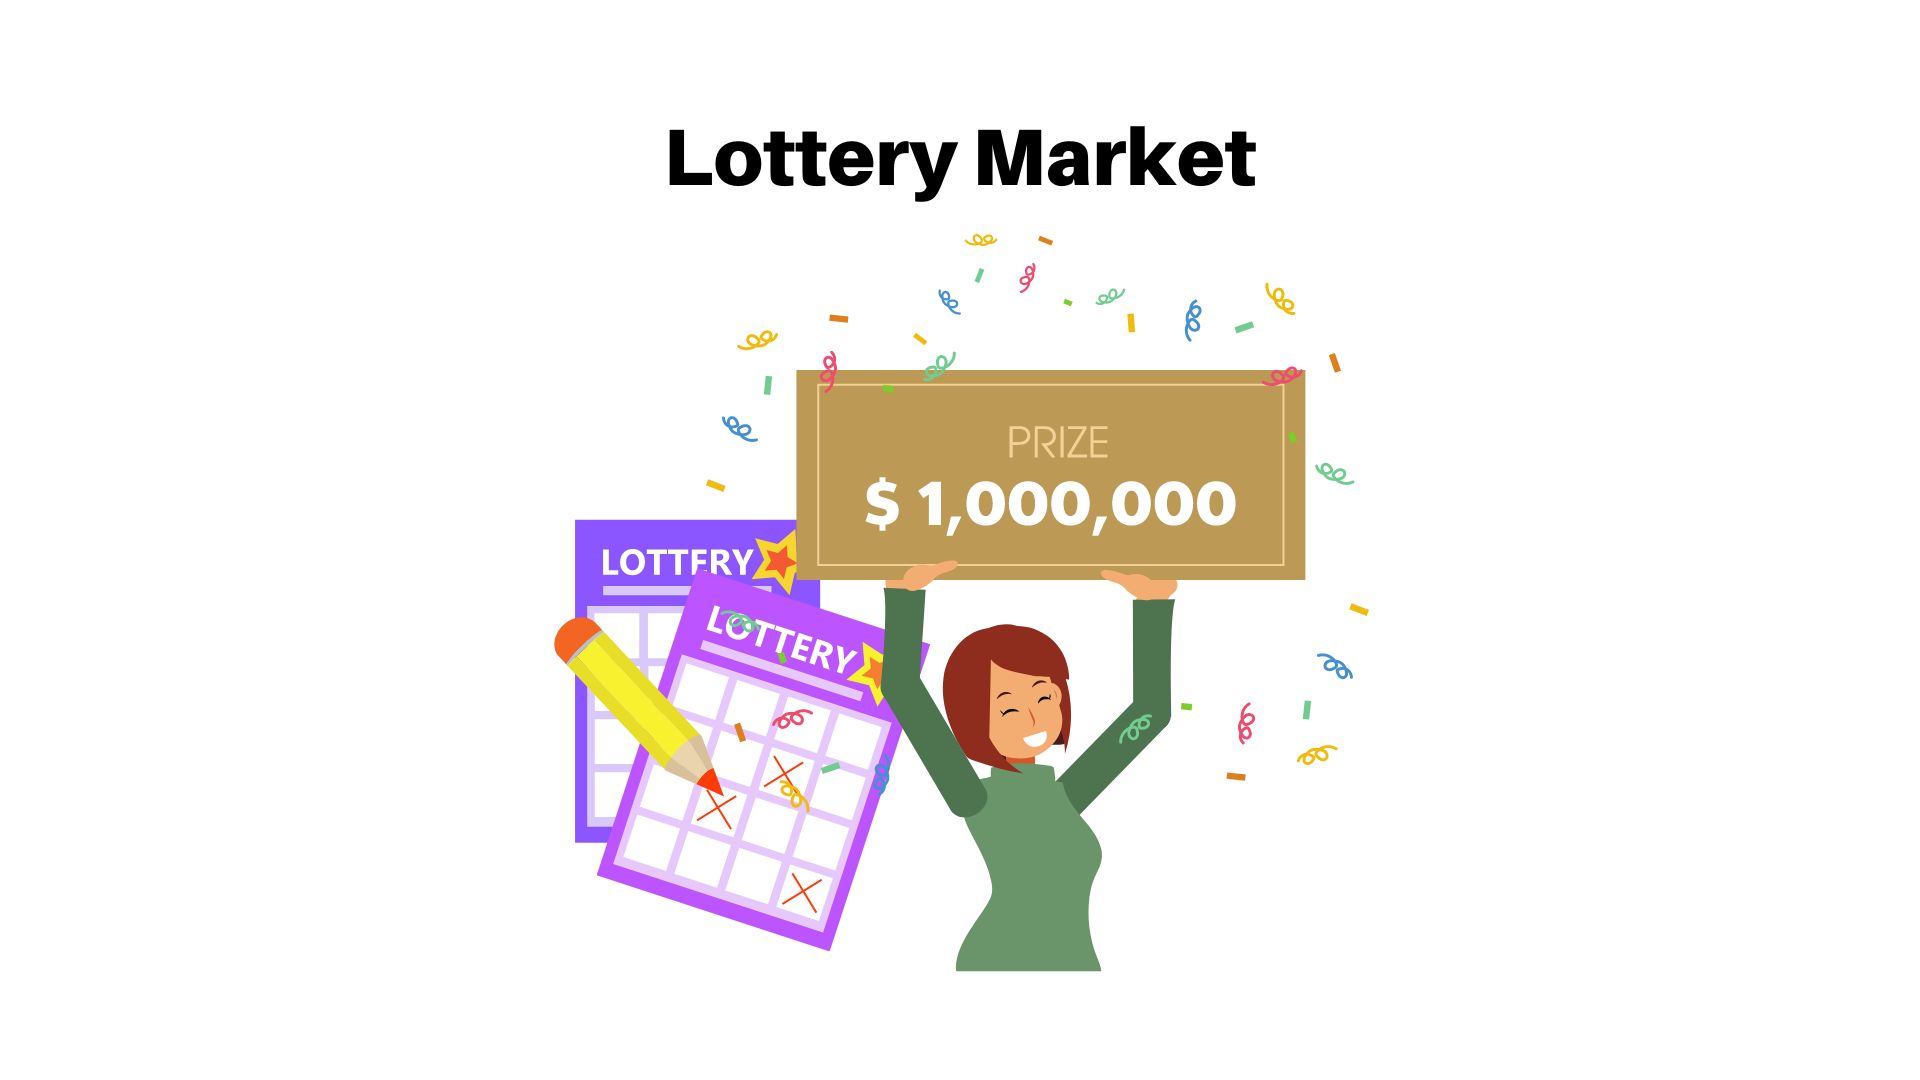 Lottery Market Value USD 974.25 billion by 2032, Patent/Trademark Analysis | Growth (8.8%) by 2032